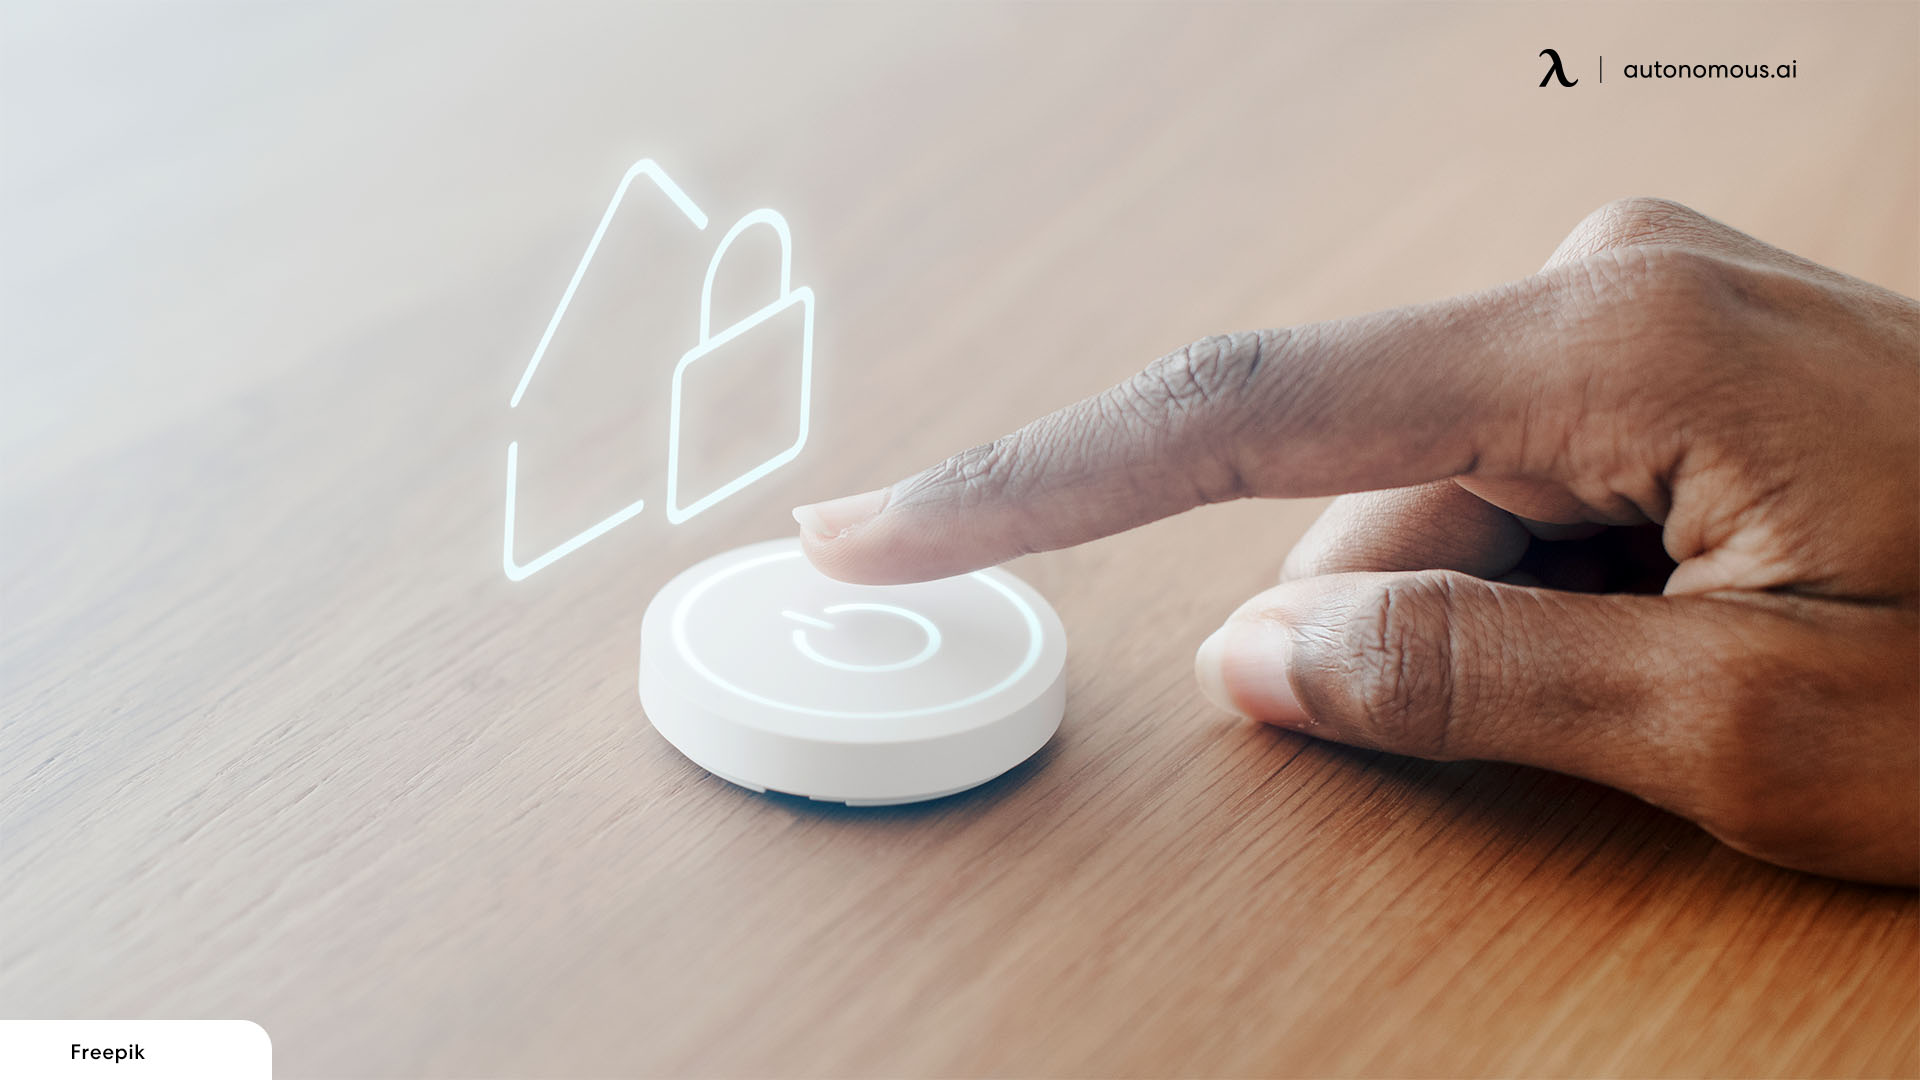 Proactive Security Signals benefits of smart home security